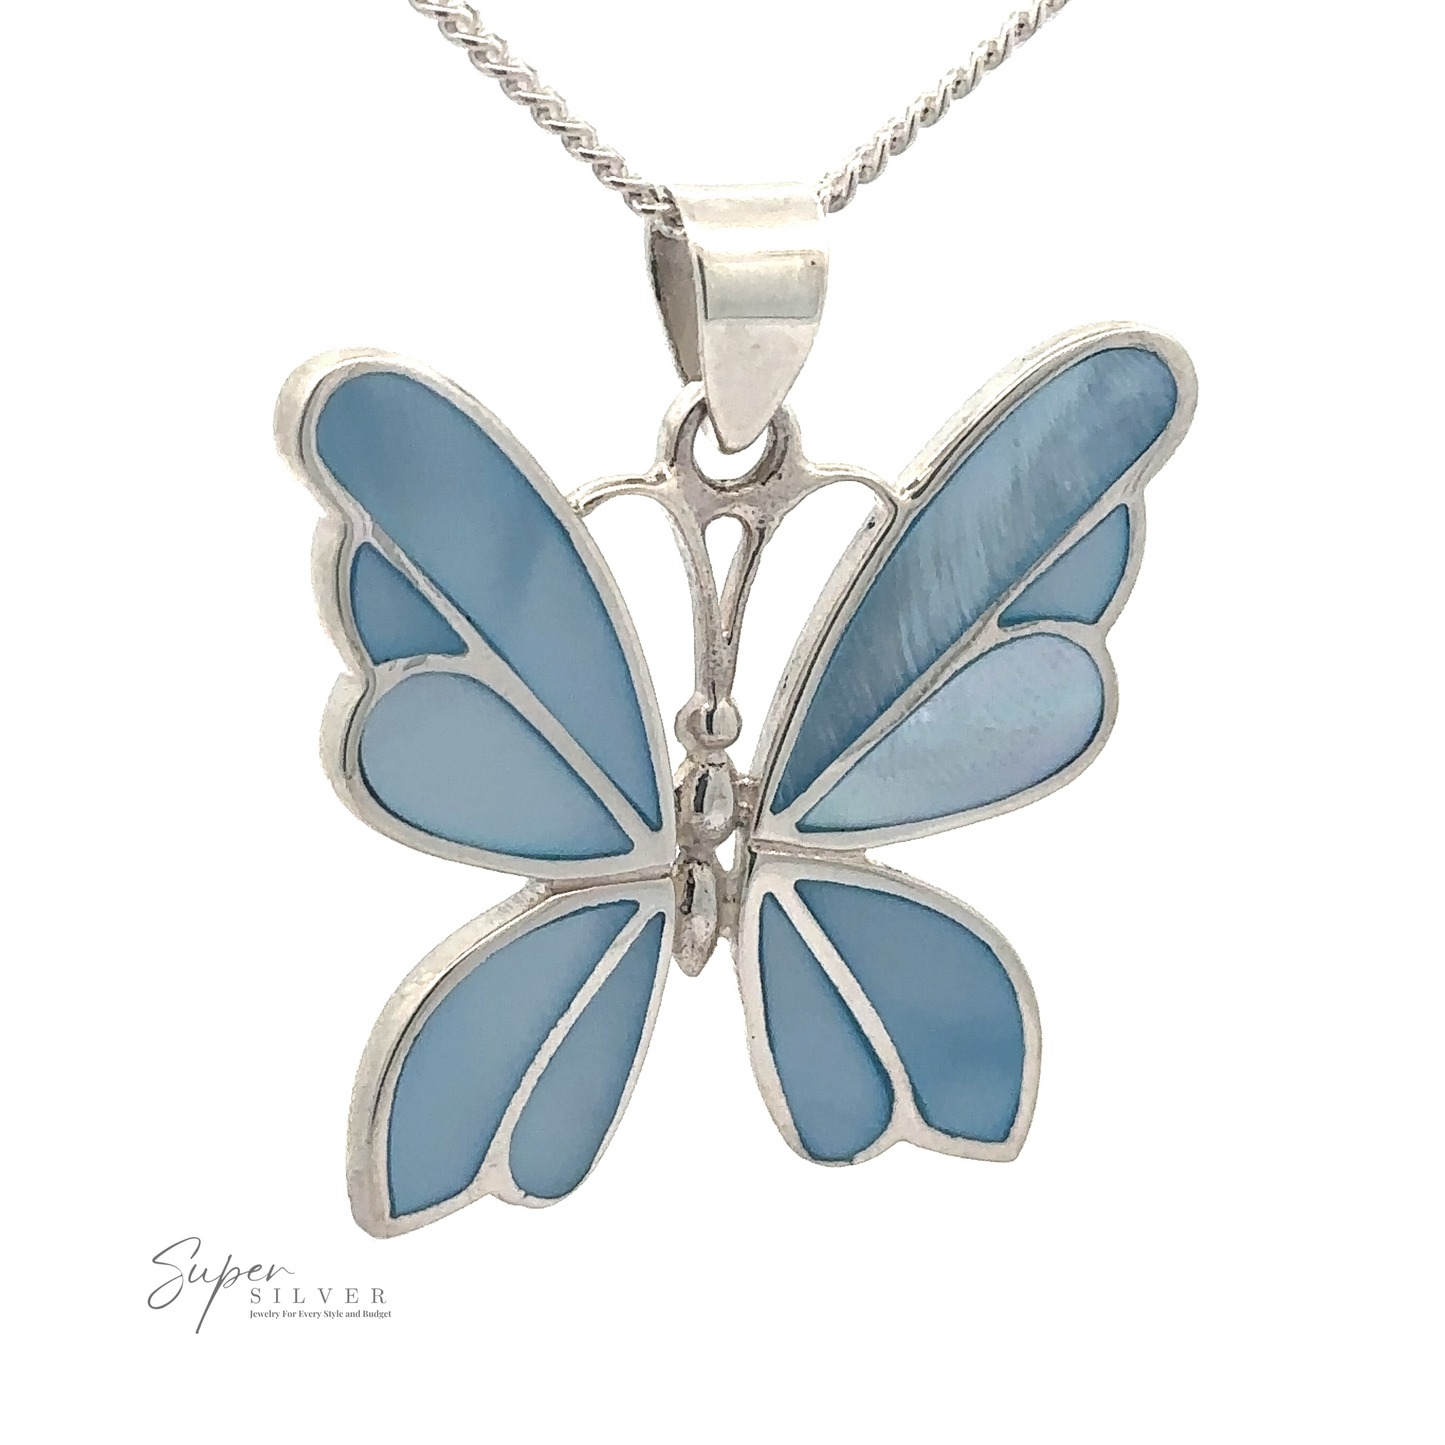 
                  
                    A Medium Inlay Butterfly Pendant featuring a butterfly pendant with turquoise enamel wings. The chain is also made of silver. The pendant has the text "Super Silver" on the bottom left.
                  
                